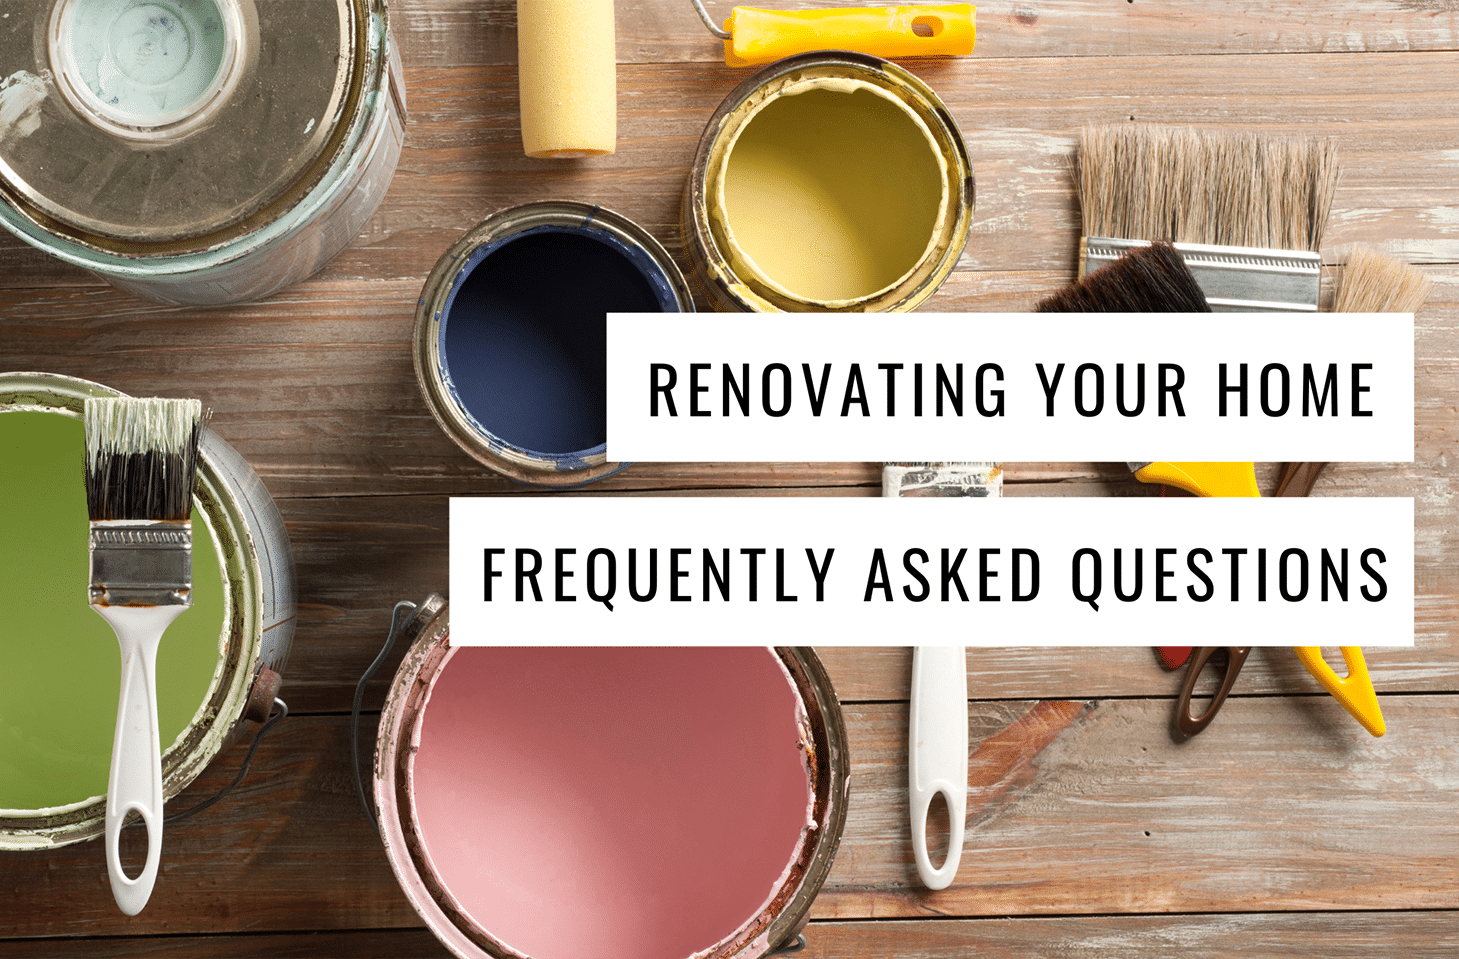 Frequently Asked Questions for Renovating your home